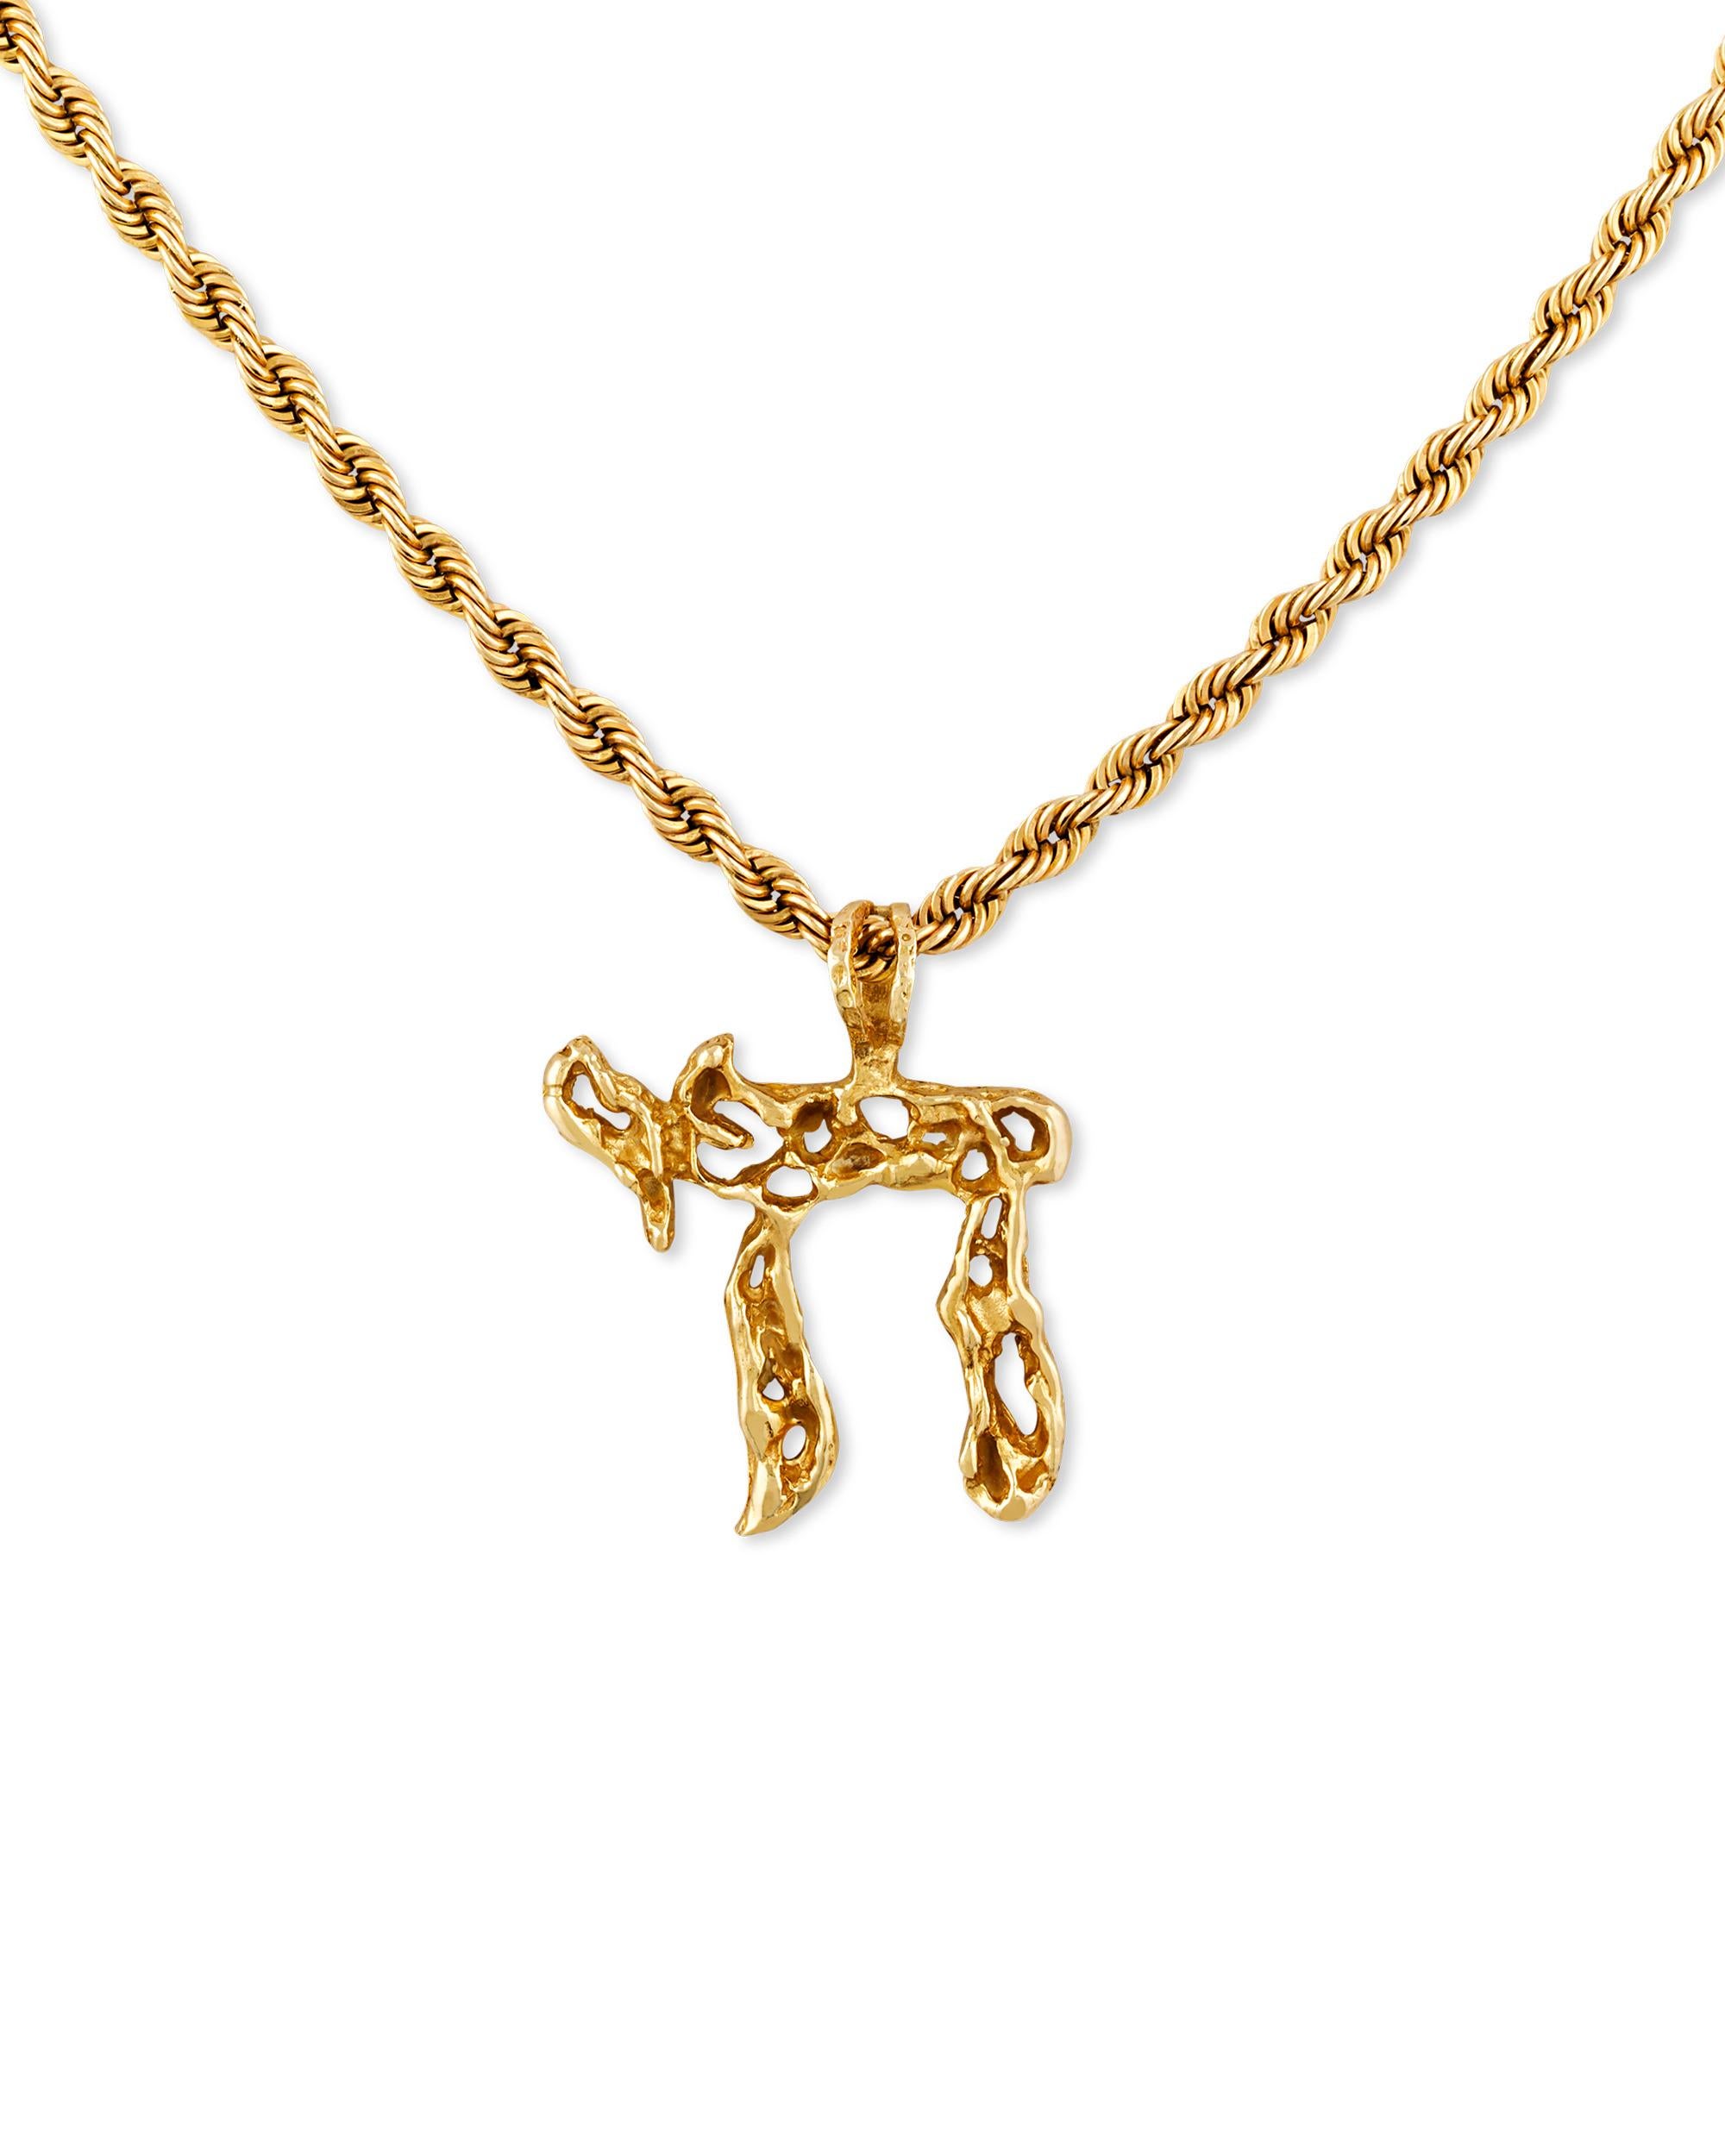 This extraordinary necklace was once owned by the one and only Elvis Presley, one of the most iconic entertainers of the 20th century. A 14K yellow gold pendant hanging from a chain takes the form of the Chai, the Hebrew word for life and an